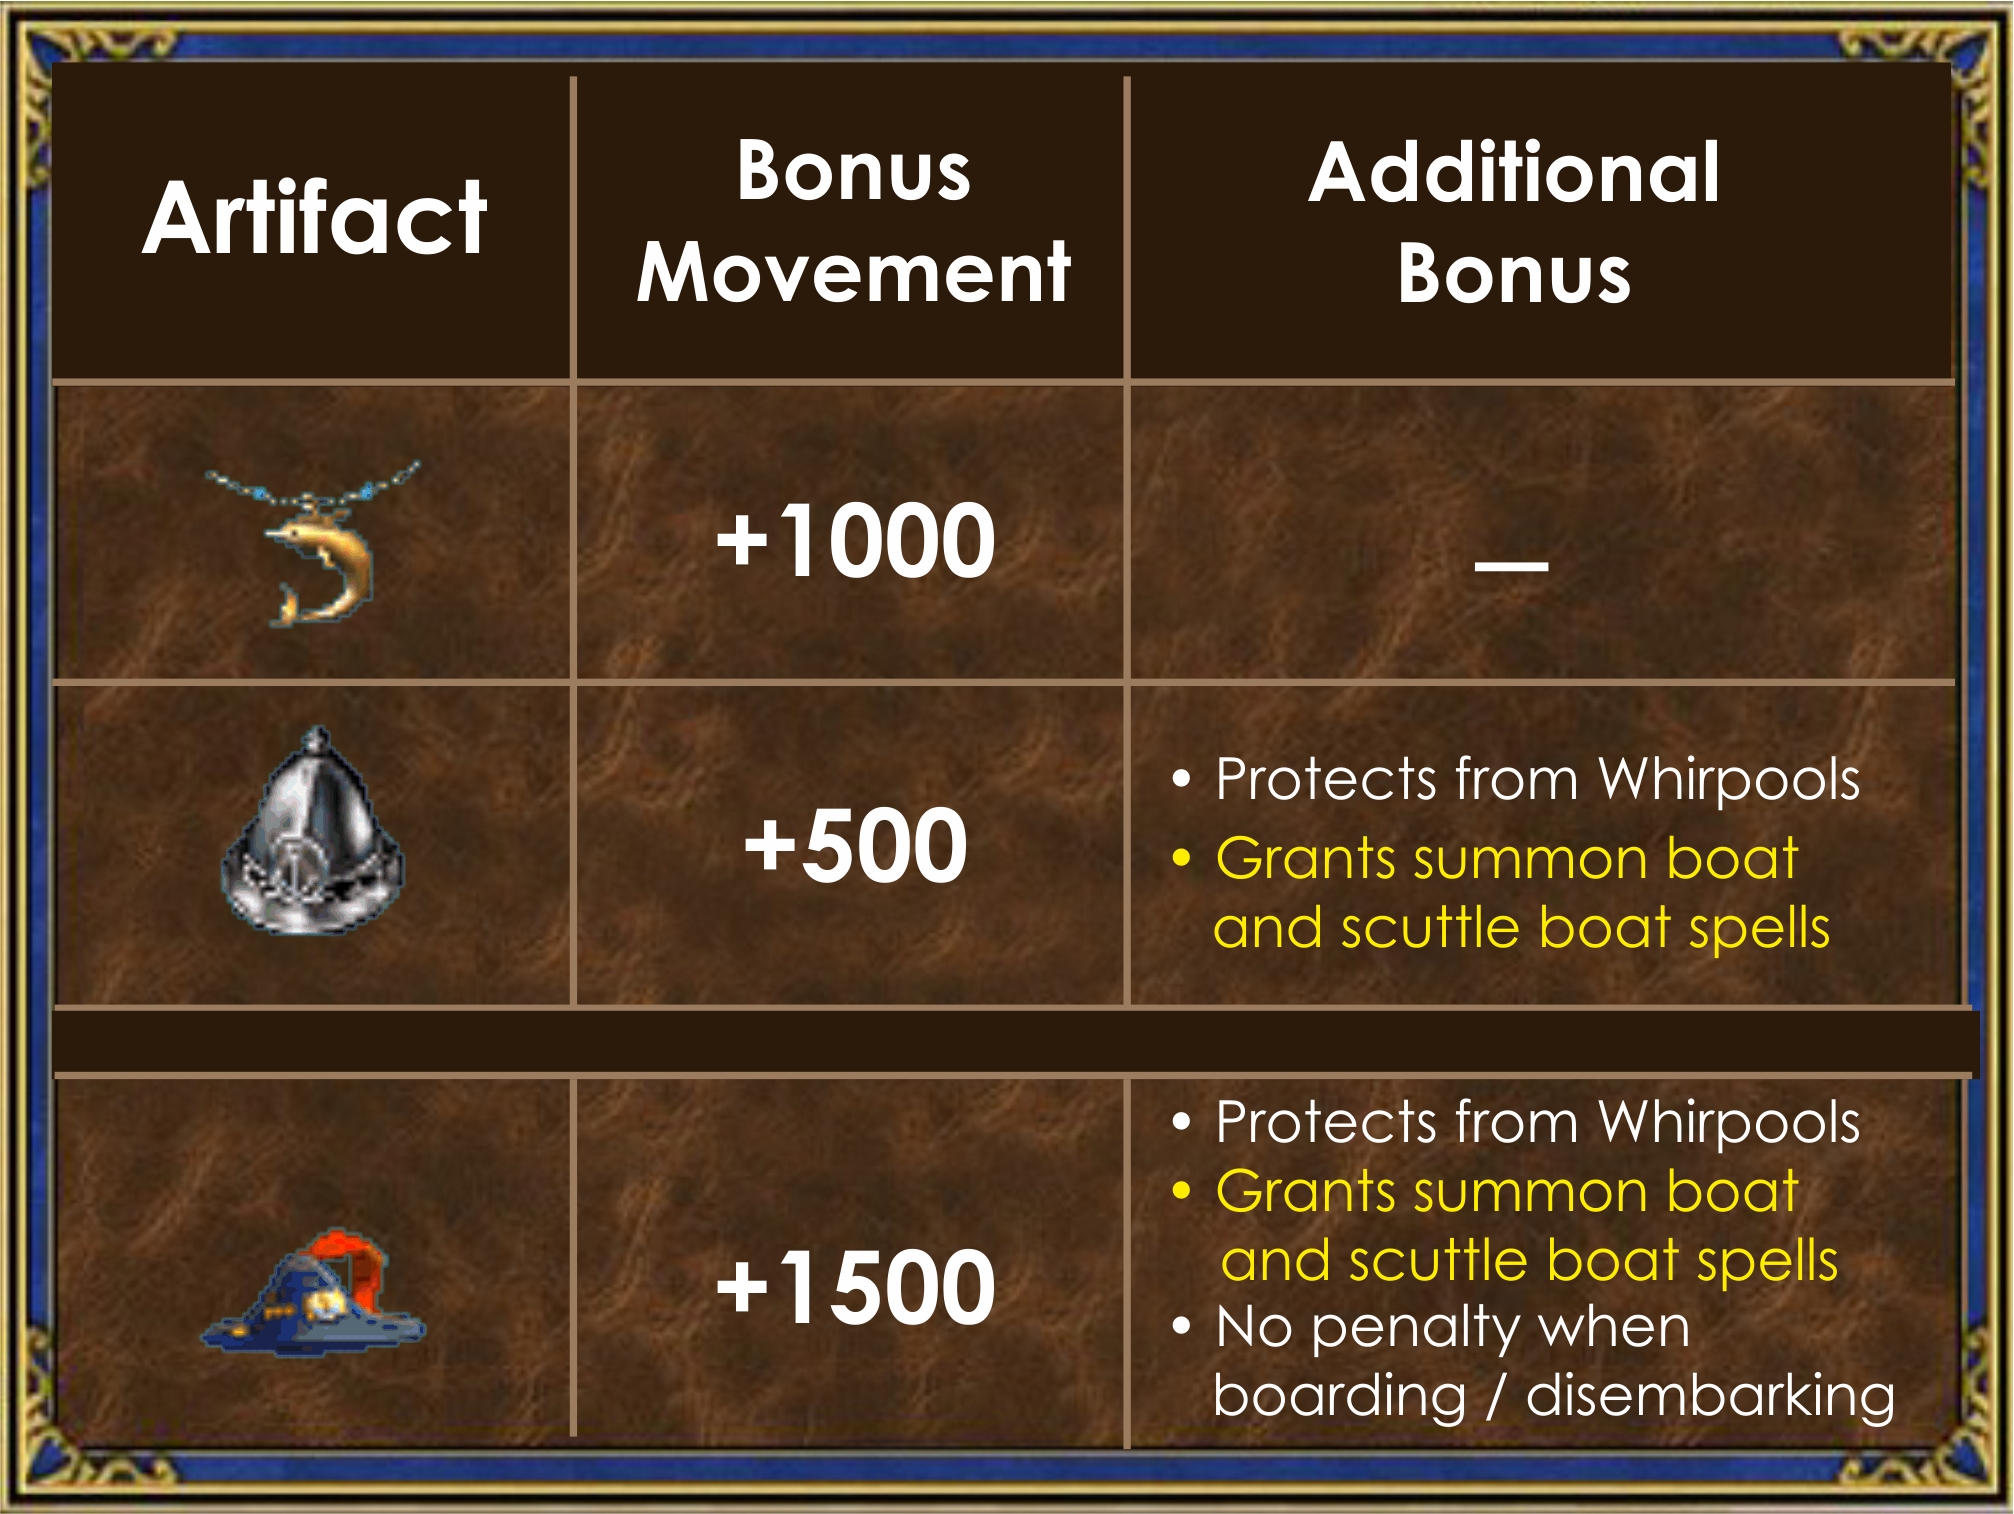 Heroes 3 - Artifacts that increase movement on the sea